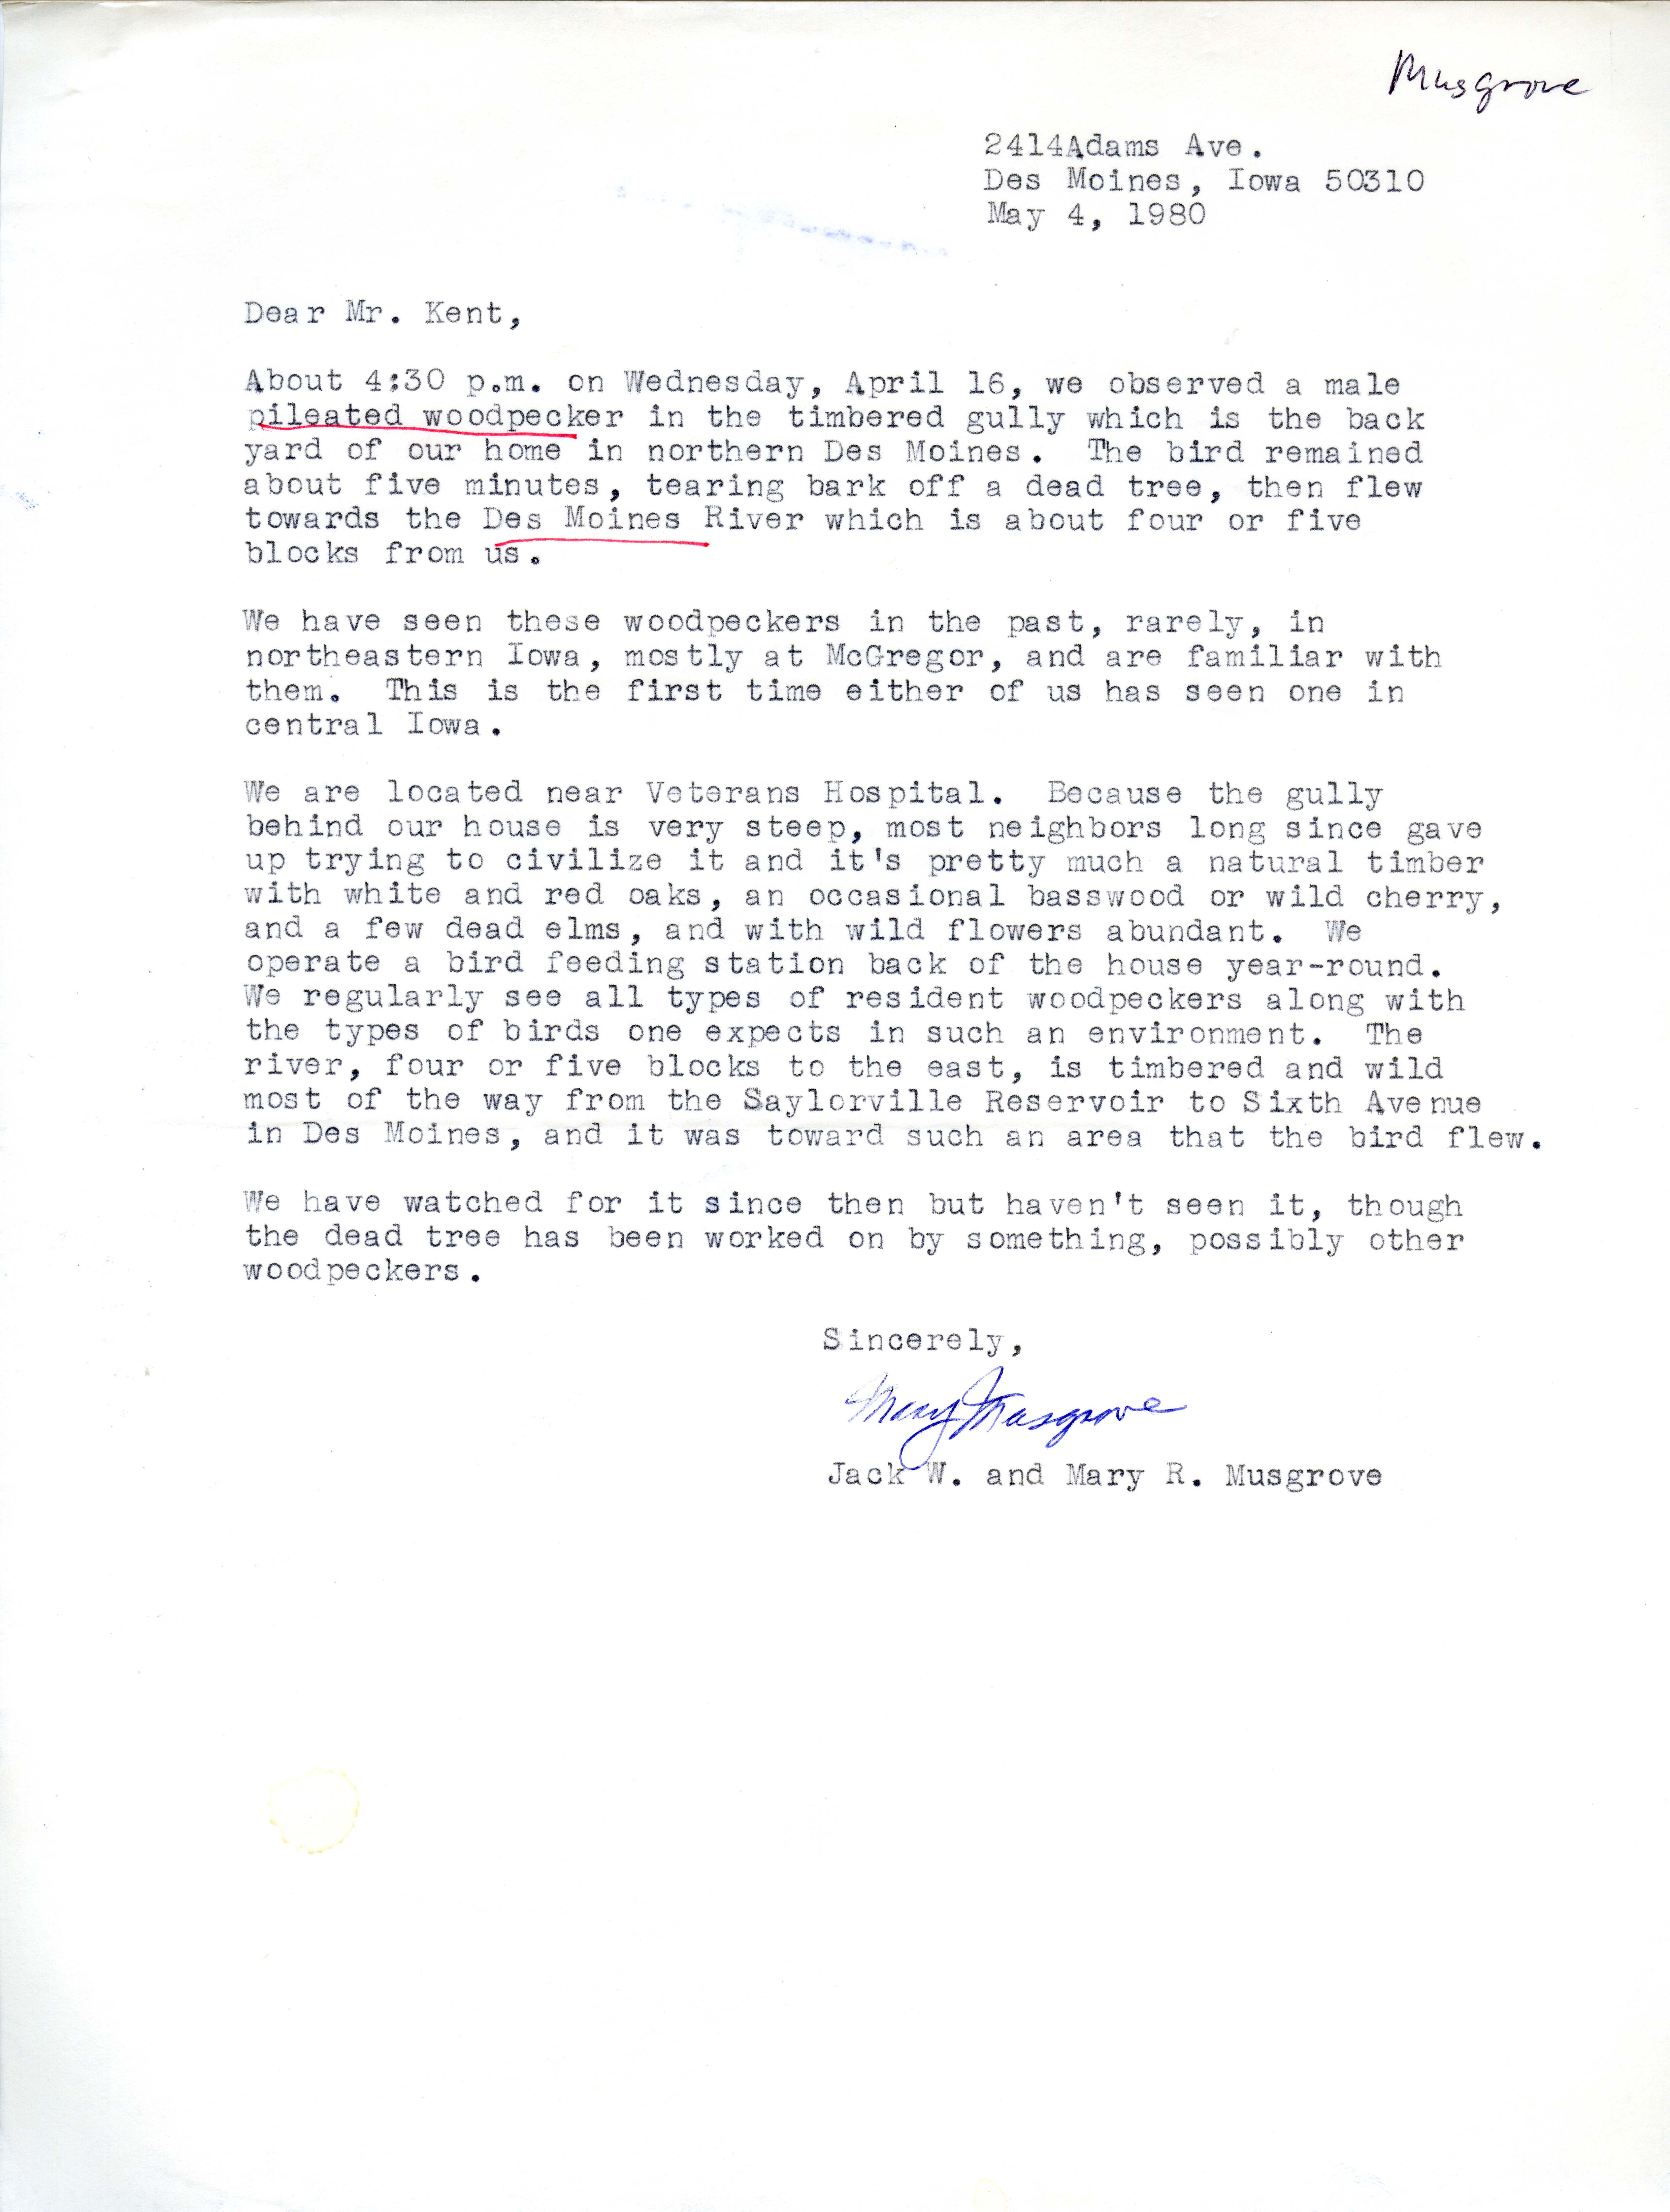 Jack W. Musgrove and Mary R. Musgrove letter to Thomas H. Kent regarding a bird sighting, May 4, 1980